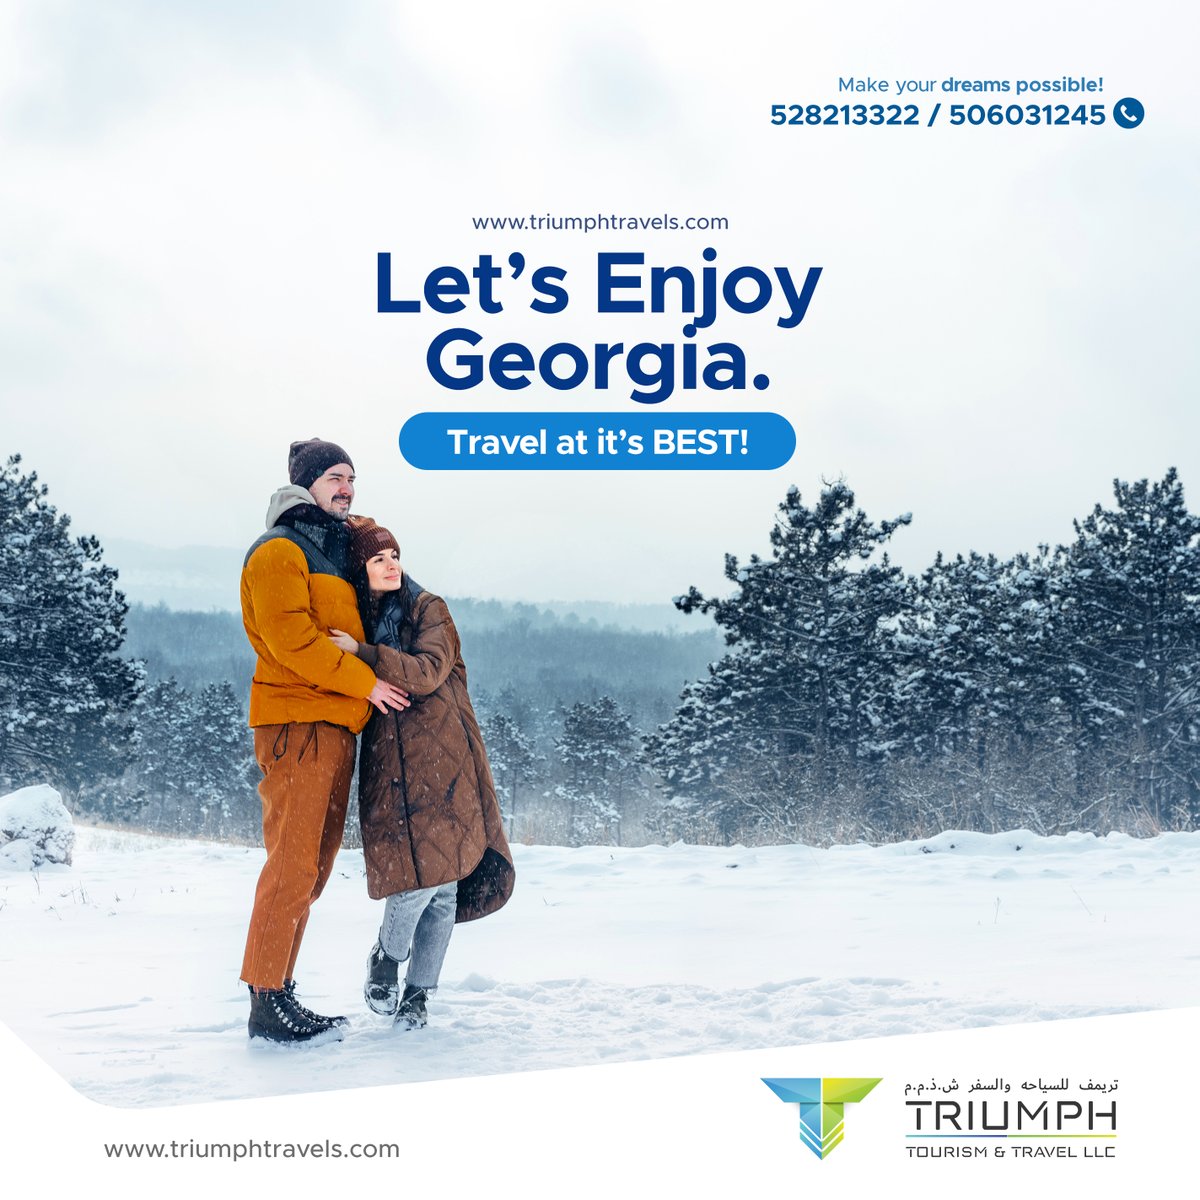 Let's explore the stunning sights of Georgia? Then let Triumph Travels and Tours be your guide! 
Come explore Georgia with us today!
☎️ 528213322 / 506031245

#triumphtravels #georgiatravel #georgia #visitgeorgia #tbilisi #georgiatravelmoments #travel #travelphotography